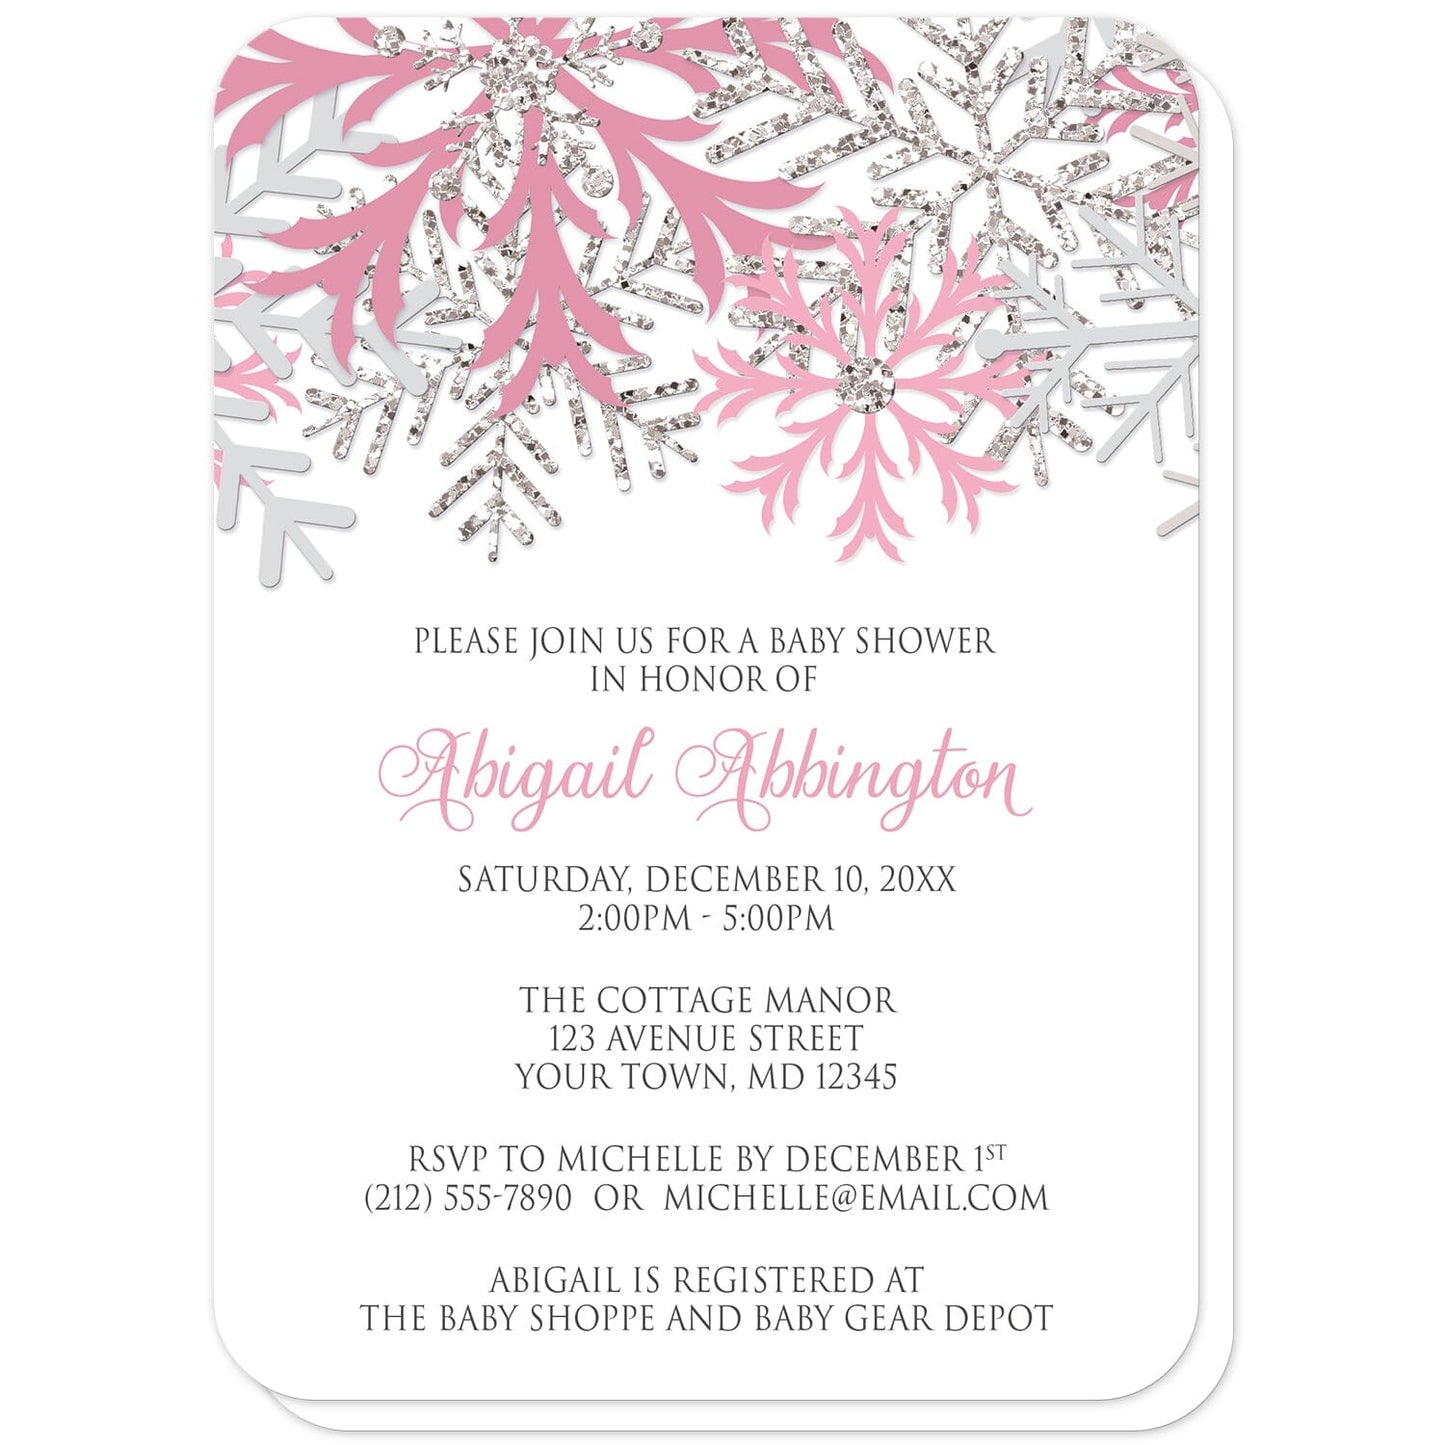 Winter Pink Silver Snowflake Baby Shower Invitations (with rounded corners) at Artistically Invited. Beautiful winter pink silver snowflake baby shower invitations designed with pink, light pink, silver-colored glitter-illustrated, and light gray snowflakes along the top over a white background. Your personalized baby shower celebration details are custom printed in pink and gray below the pretty snowflakes.